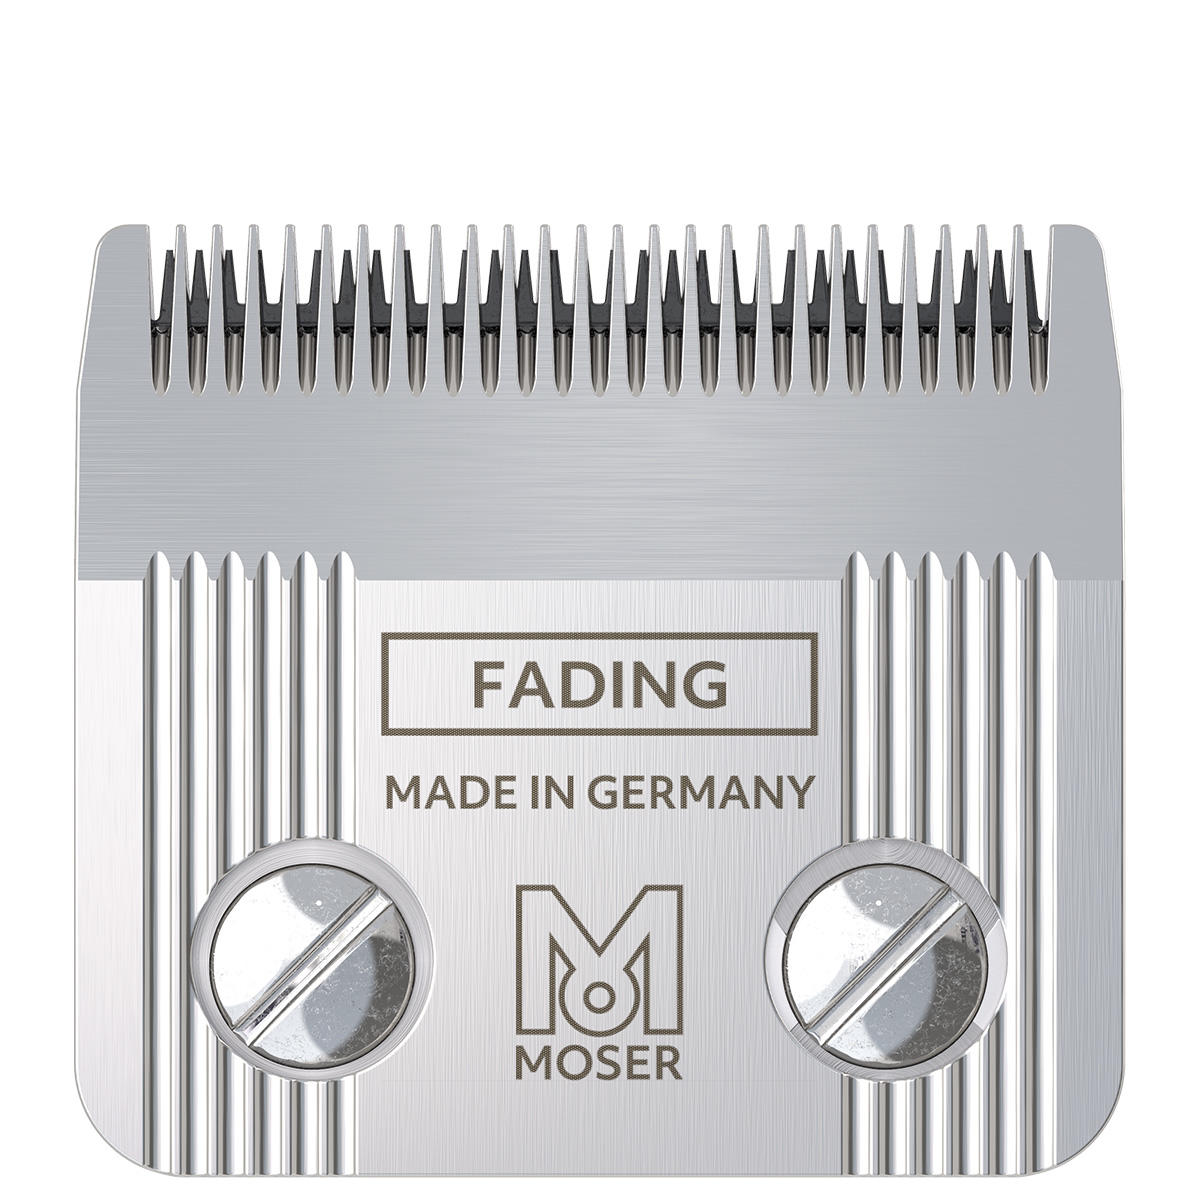 Moser Fading Blade for Moser Primat - 1